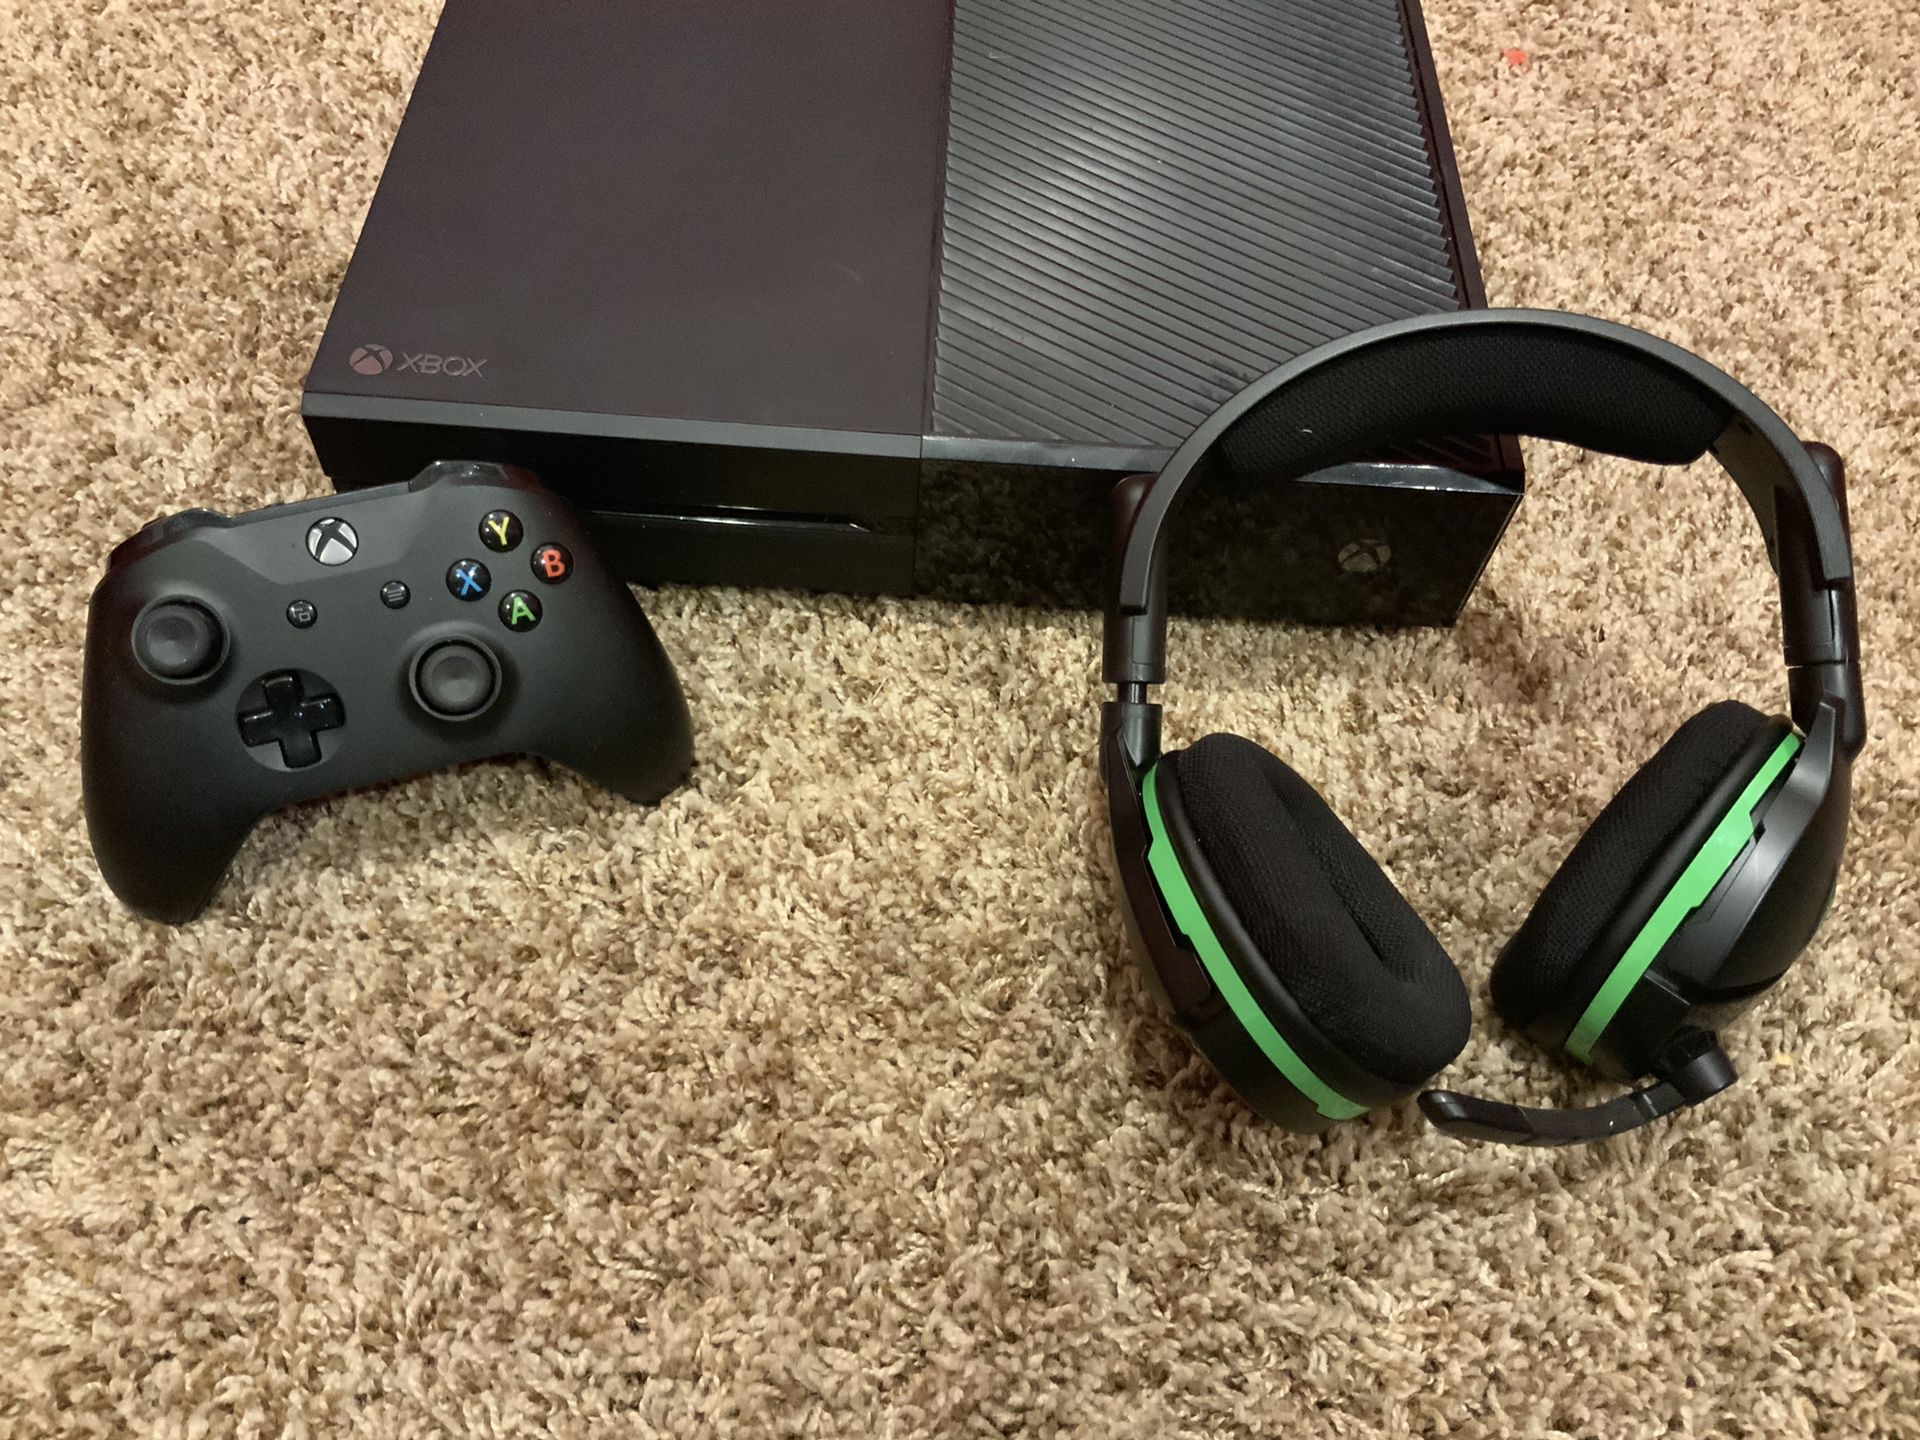 Xbox One w/ Controller and Headset PLUS Xbox Live Account!